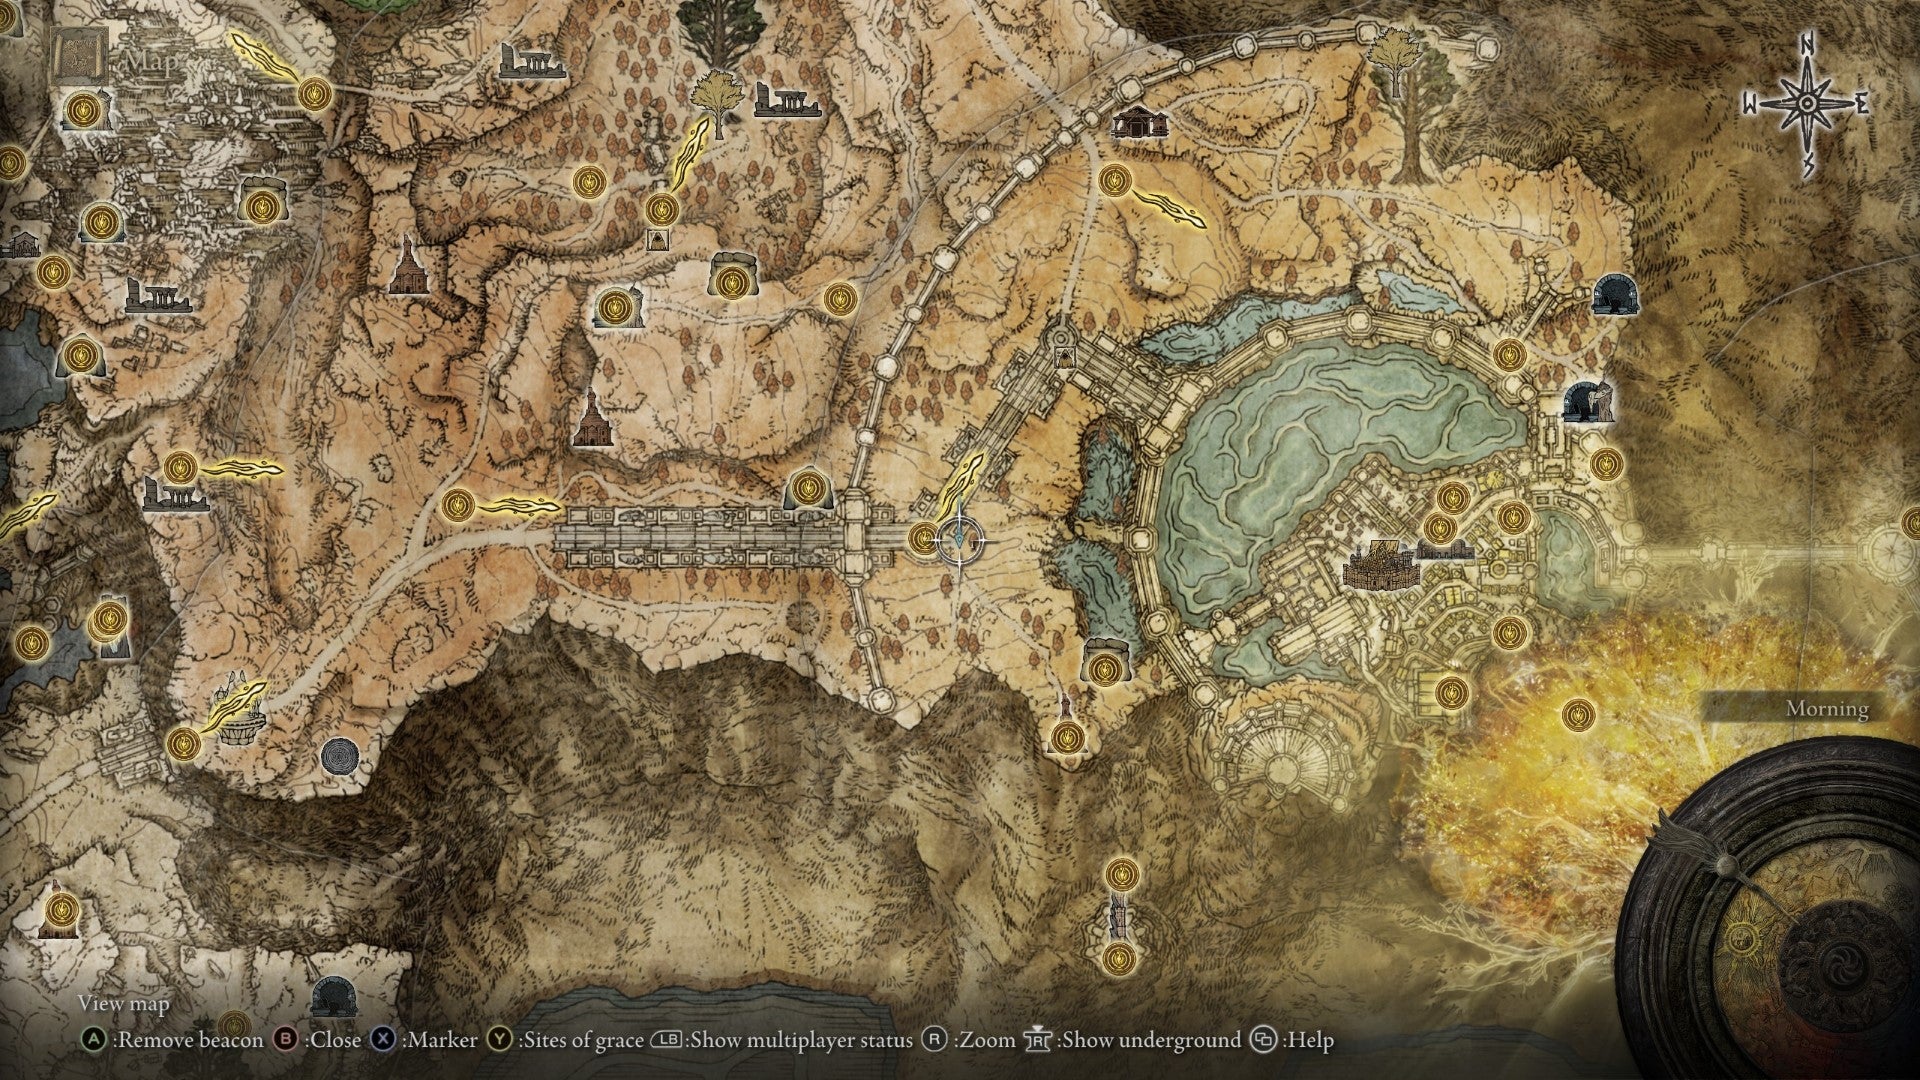 The location of the Leyndell, Royal Capital map fragment in Elden Ring